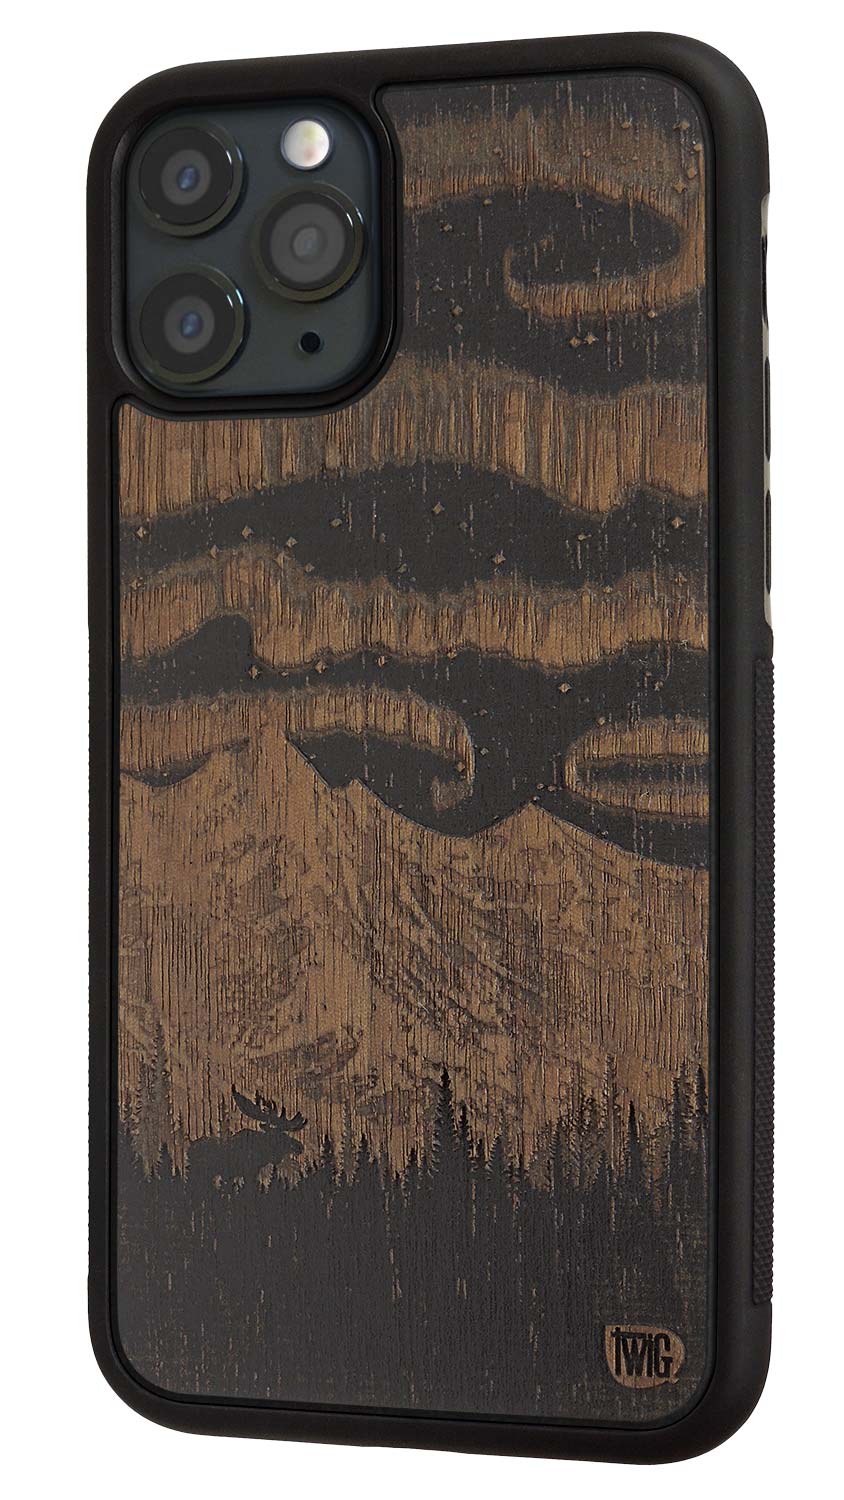 Northern Lights - Walnut iPhone Case, iPhone Case - Twig Case Co.